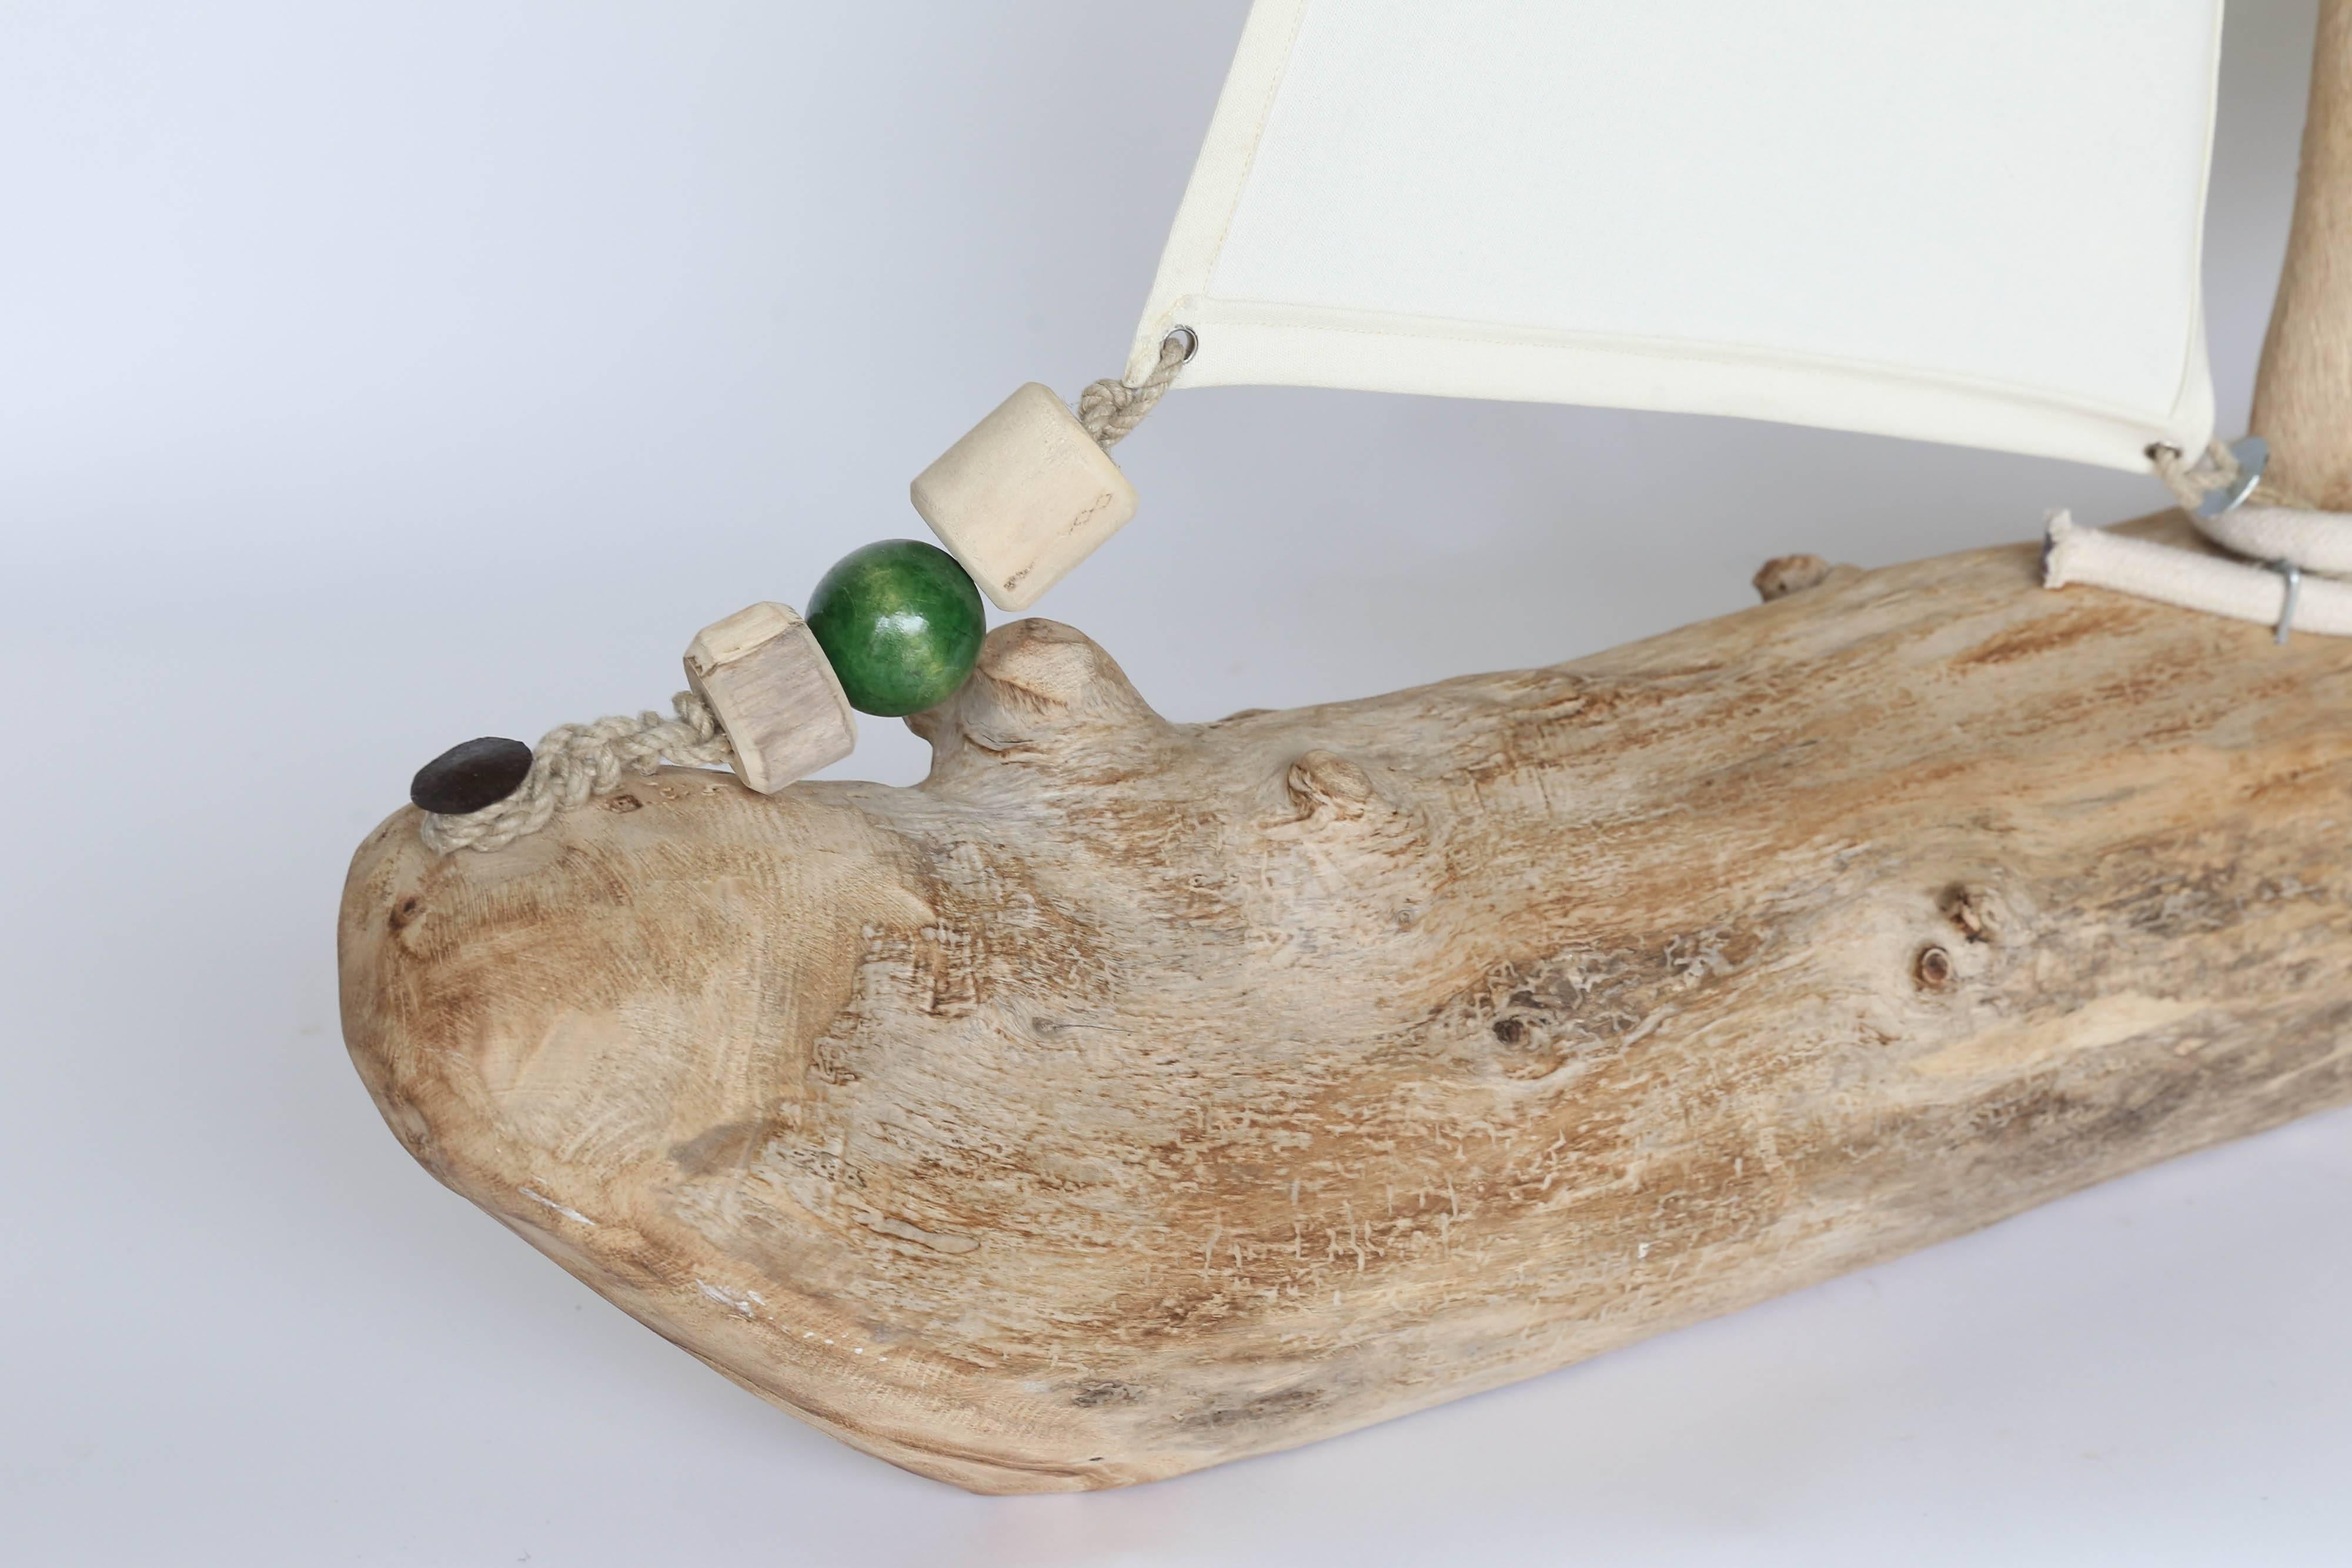 This sailboat is a creation from the Catalan region of Spain. The husband and wife team creates art that brings nature closer to your home in a decorative and functional way. The body of the boat is made from a piece of sea driftwood that was